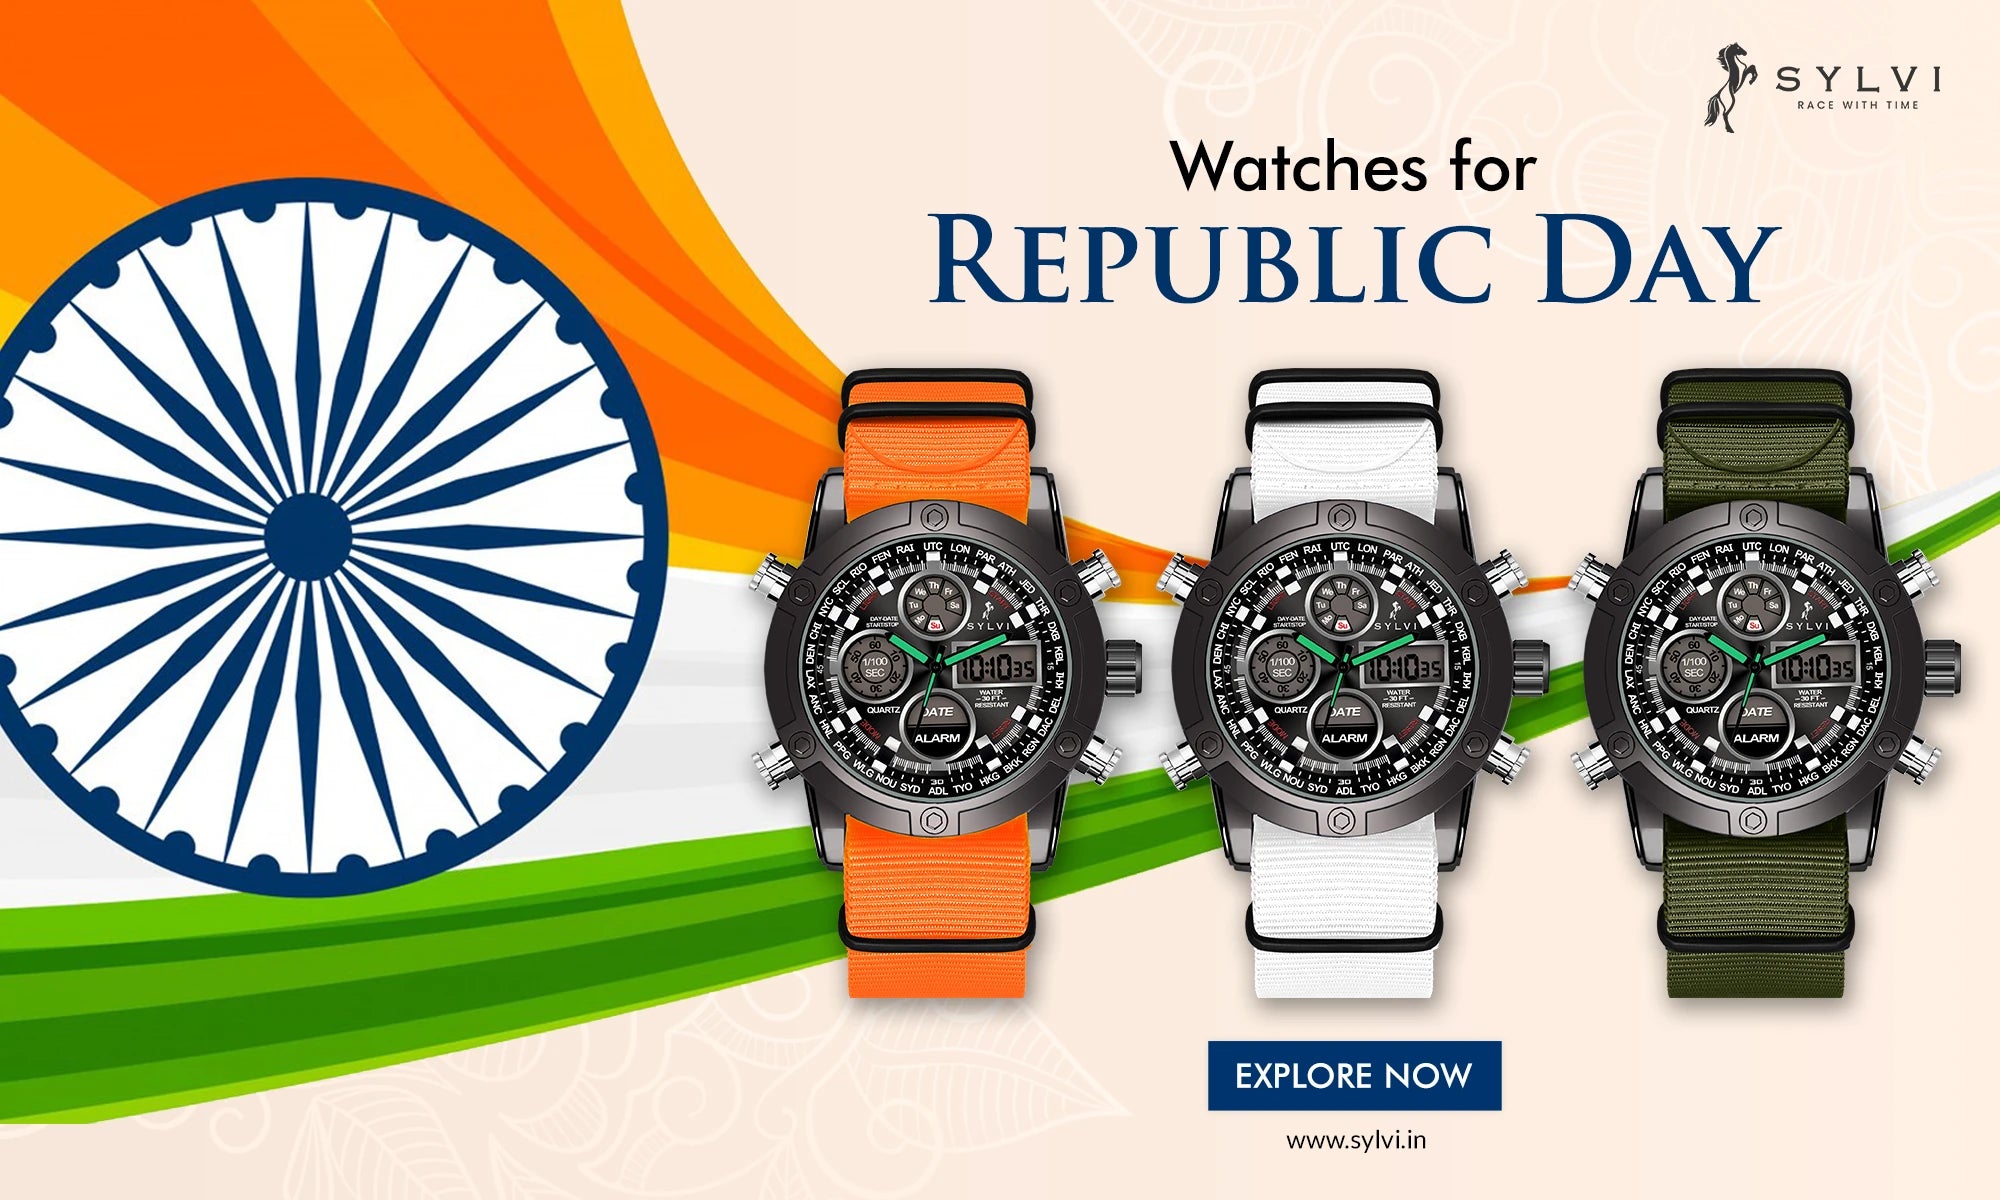 The Ultimate Republic Day Watch Collection - Best 3 Sylvi Watches